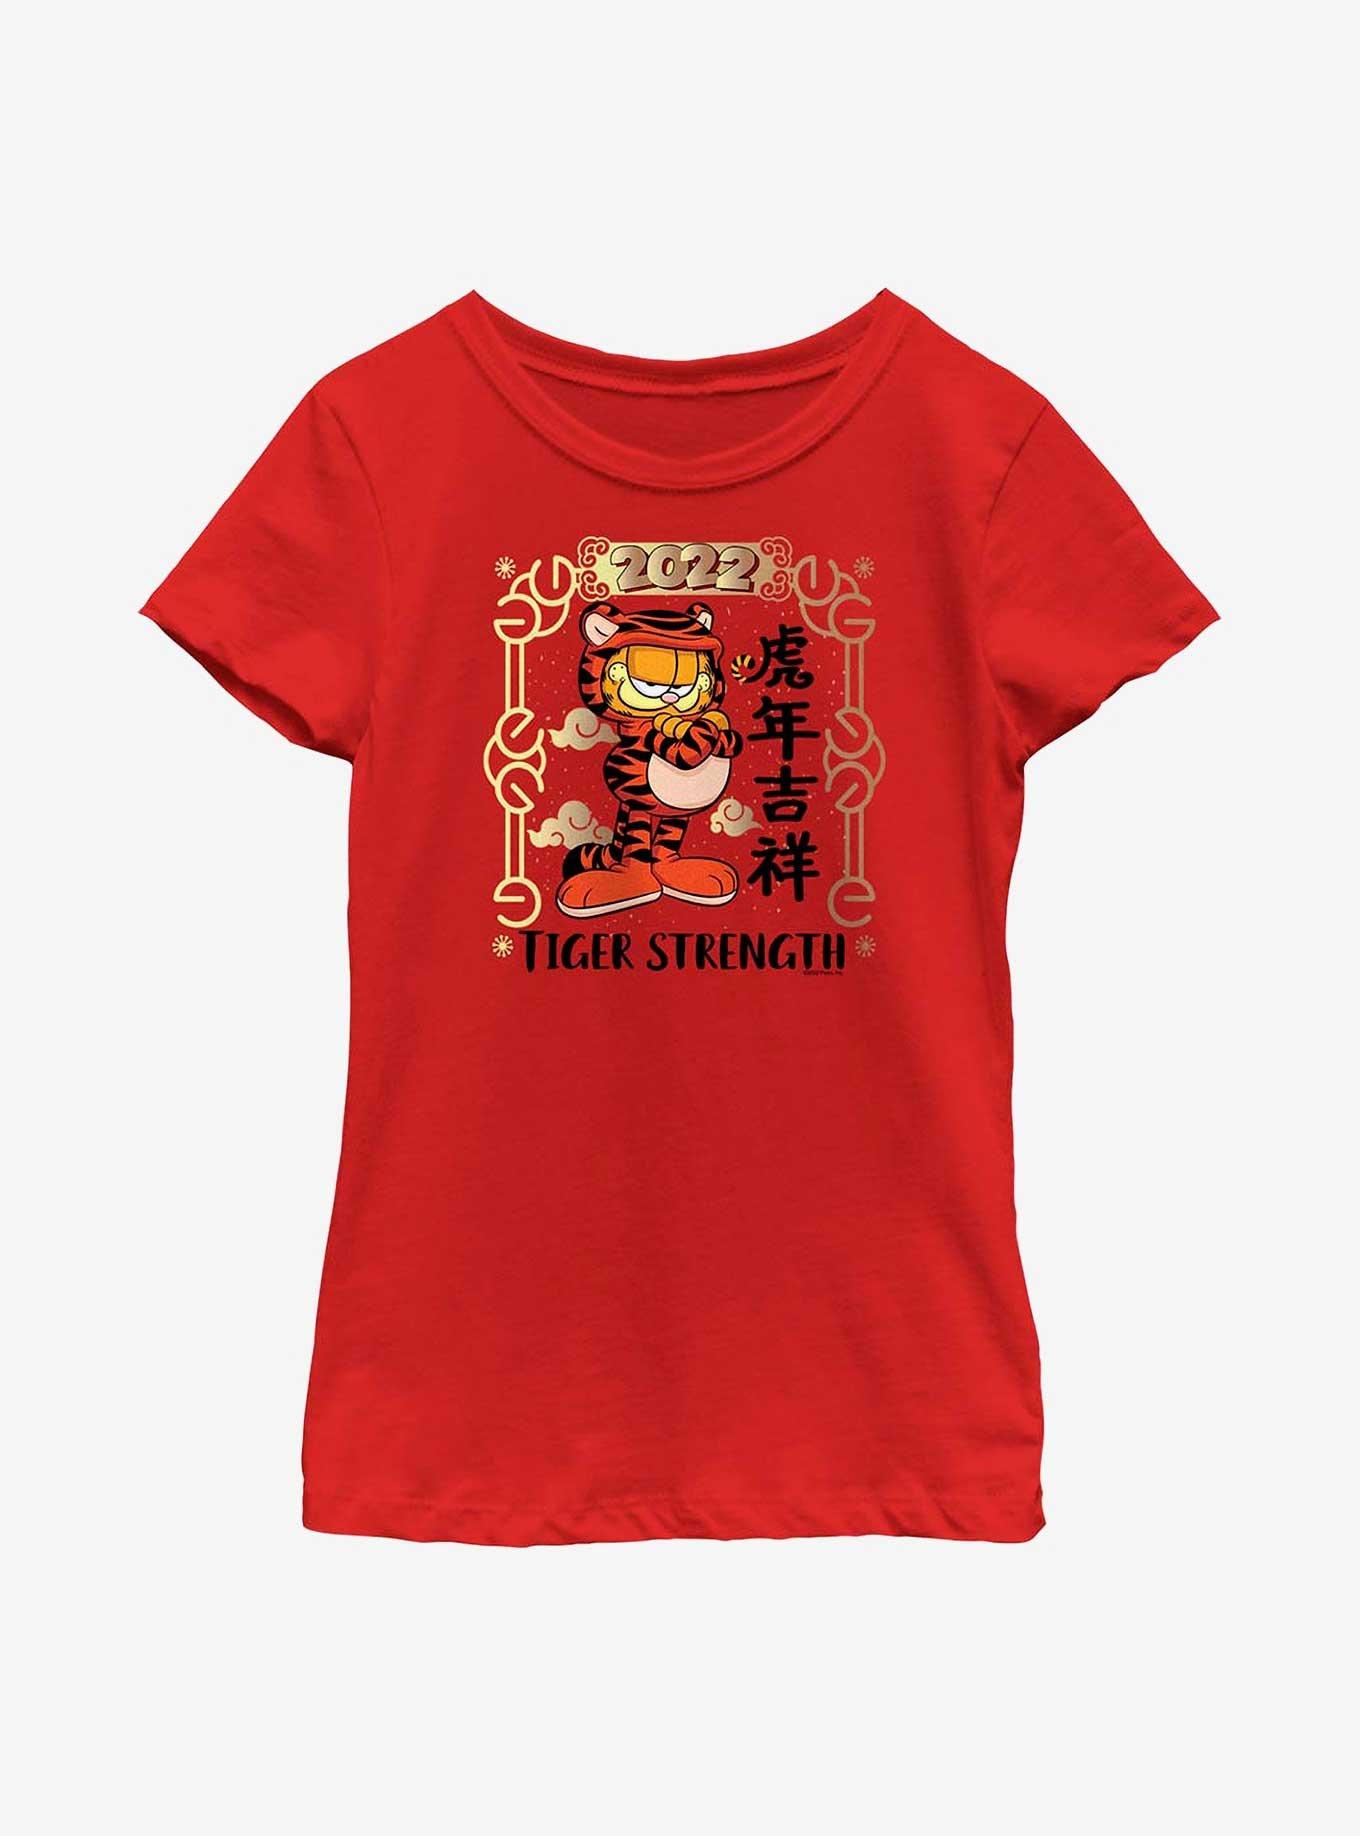 Garfield Tiger Strength Poster Youth Girl's T-Shirt, RED, hi-res